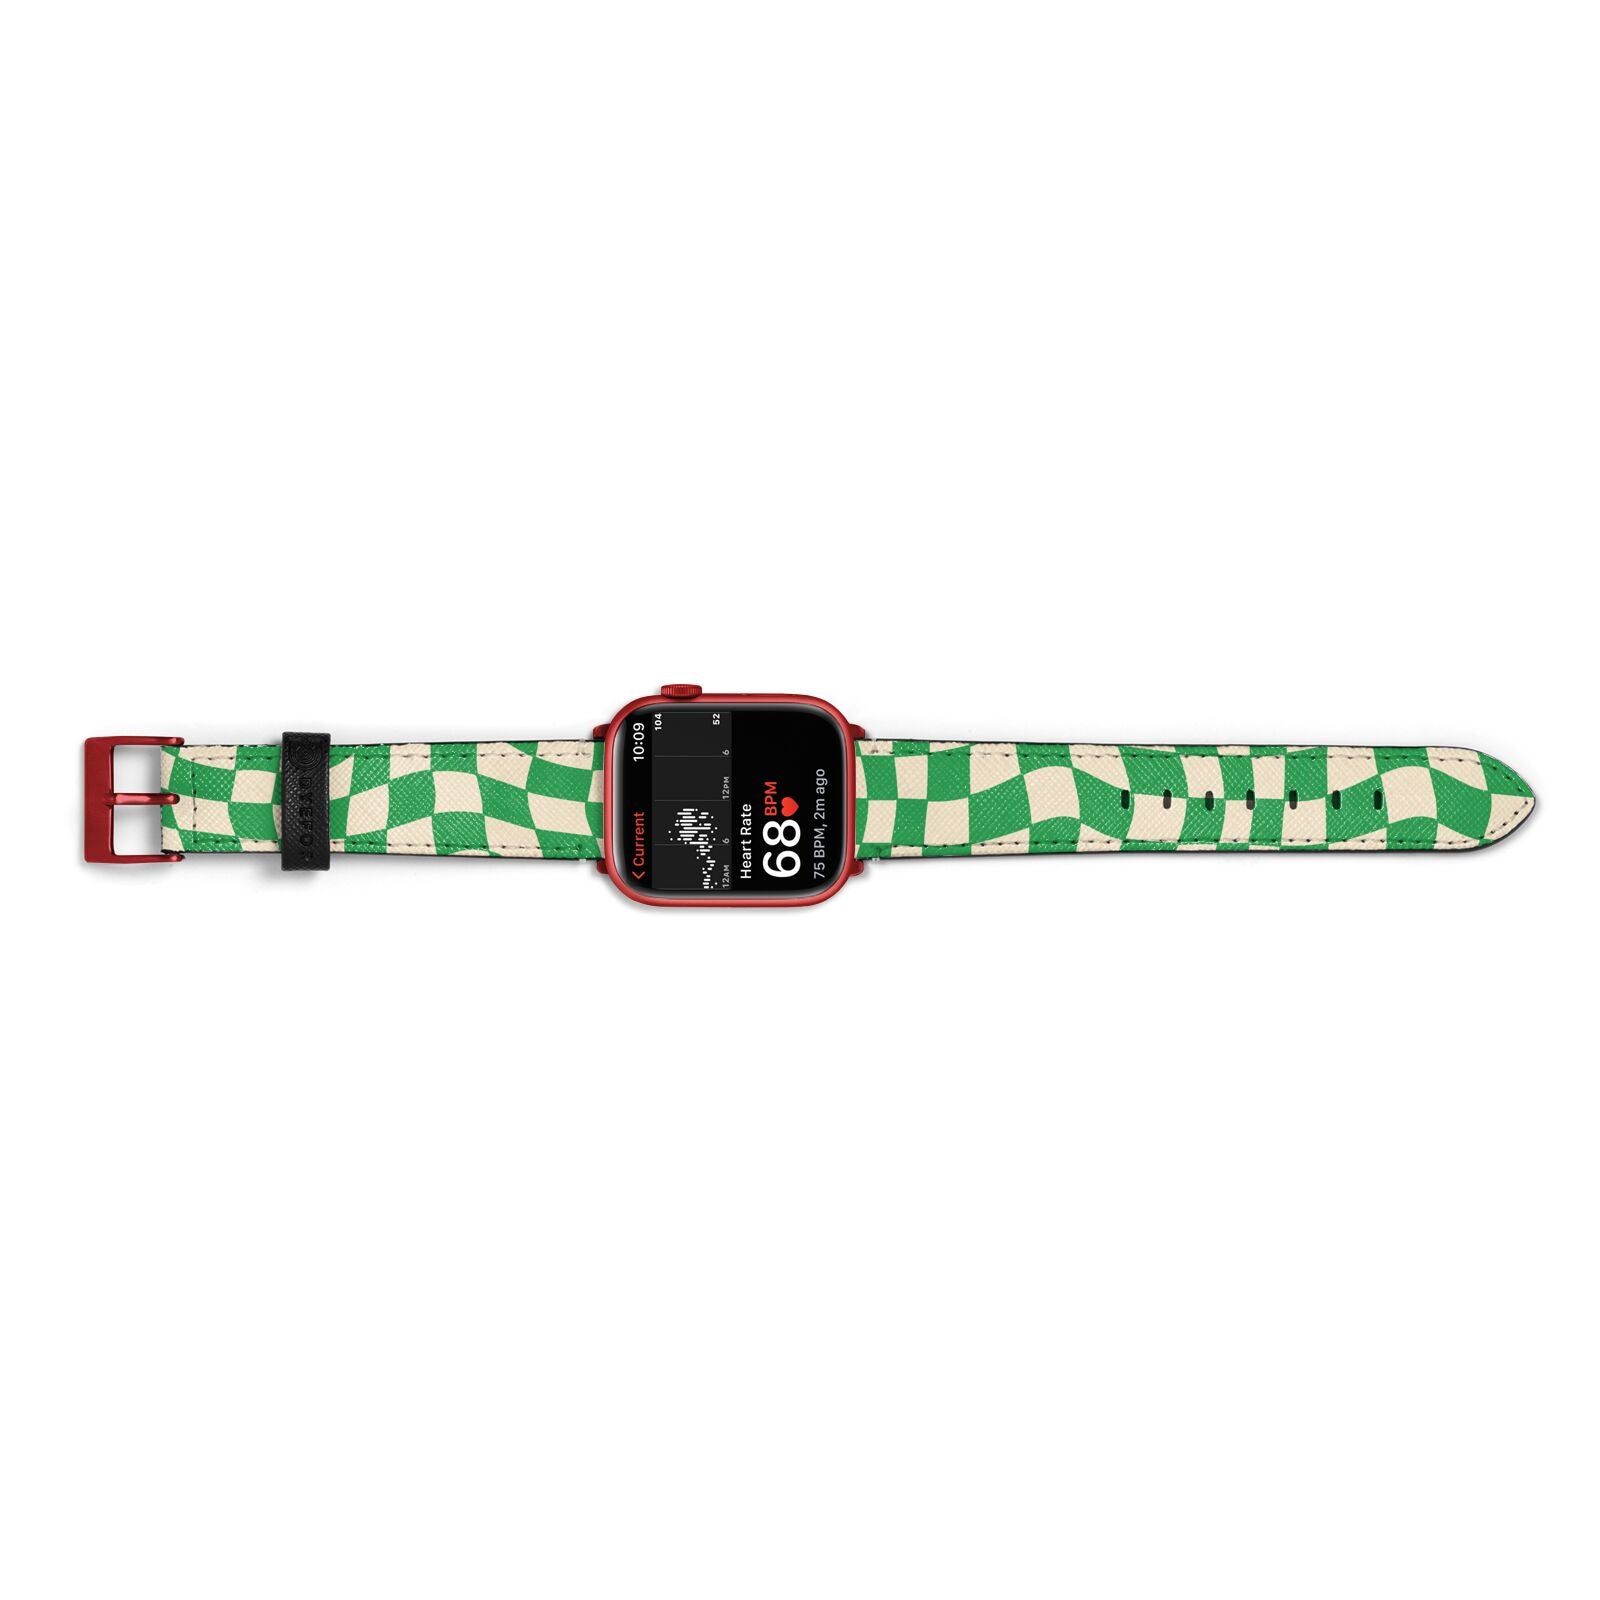 Green Check Apple Watch Strap Size 38mm Landscape Image Red Hardware